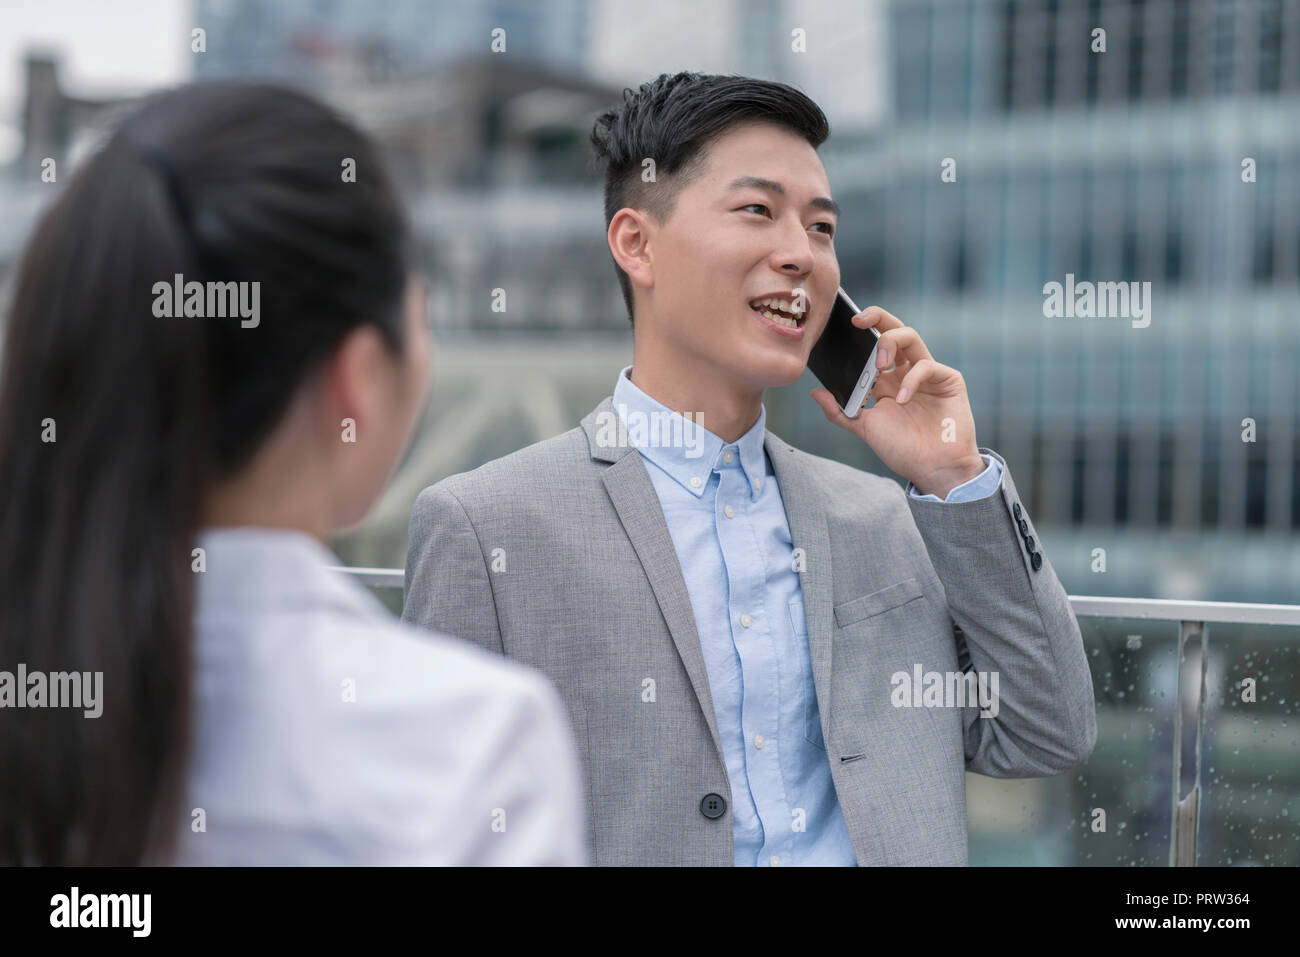 Young businesswoman et man talking on smartphone in ville, Shanghai, Chine Banque D'Images